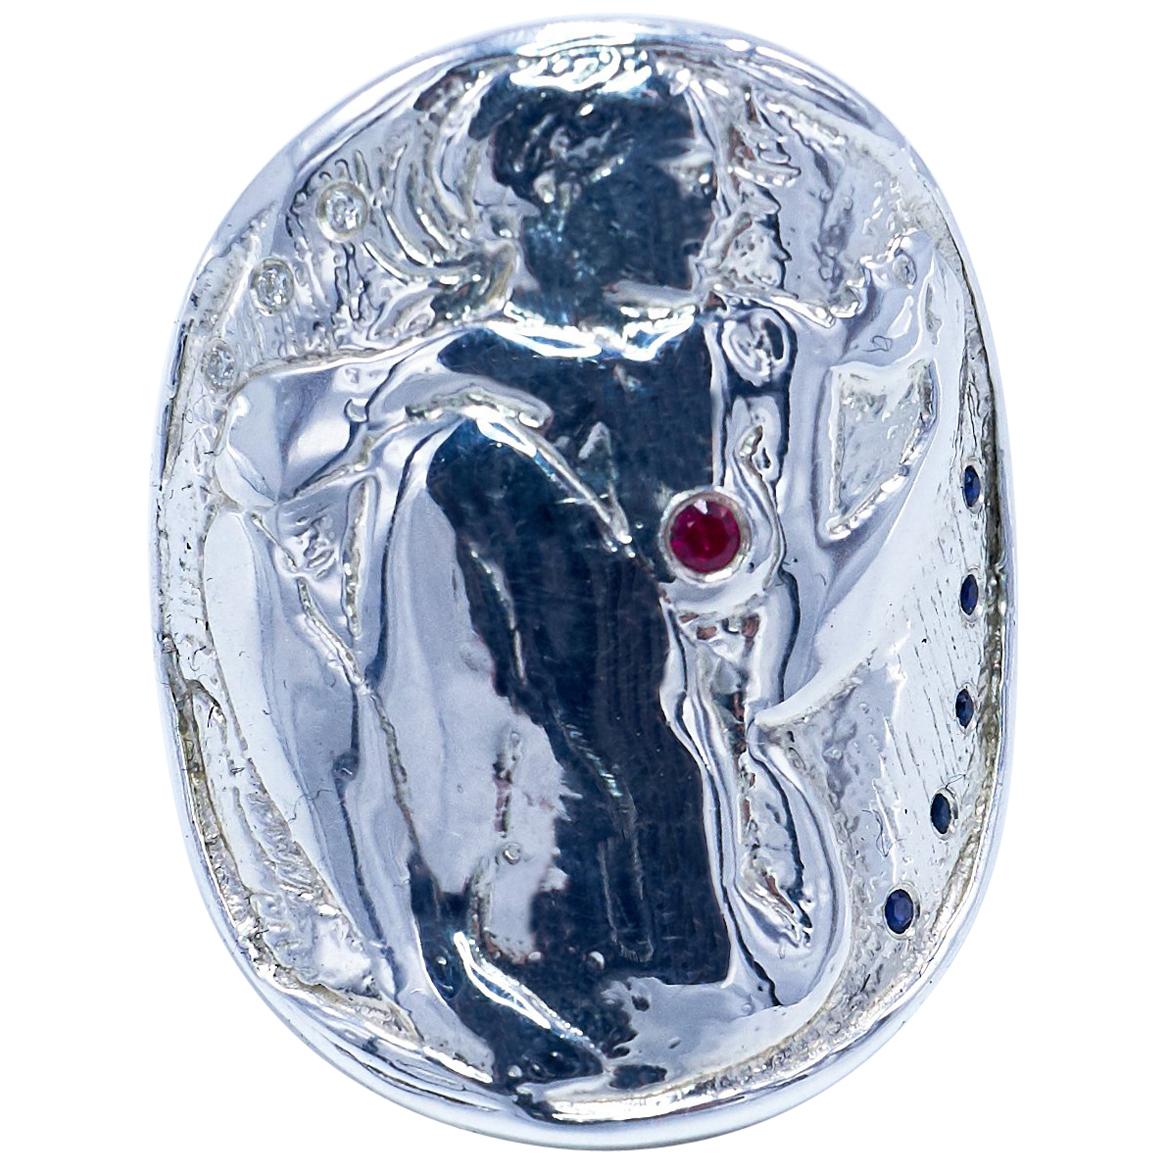 3 pcs White Diamond 1 Pc Ruby 5 pcs Blue Sapphire Medal Ring Coin Ring with a Woman looking at a mask -  Art Nouveau Style

J DAUPHIN 